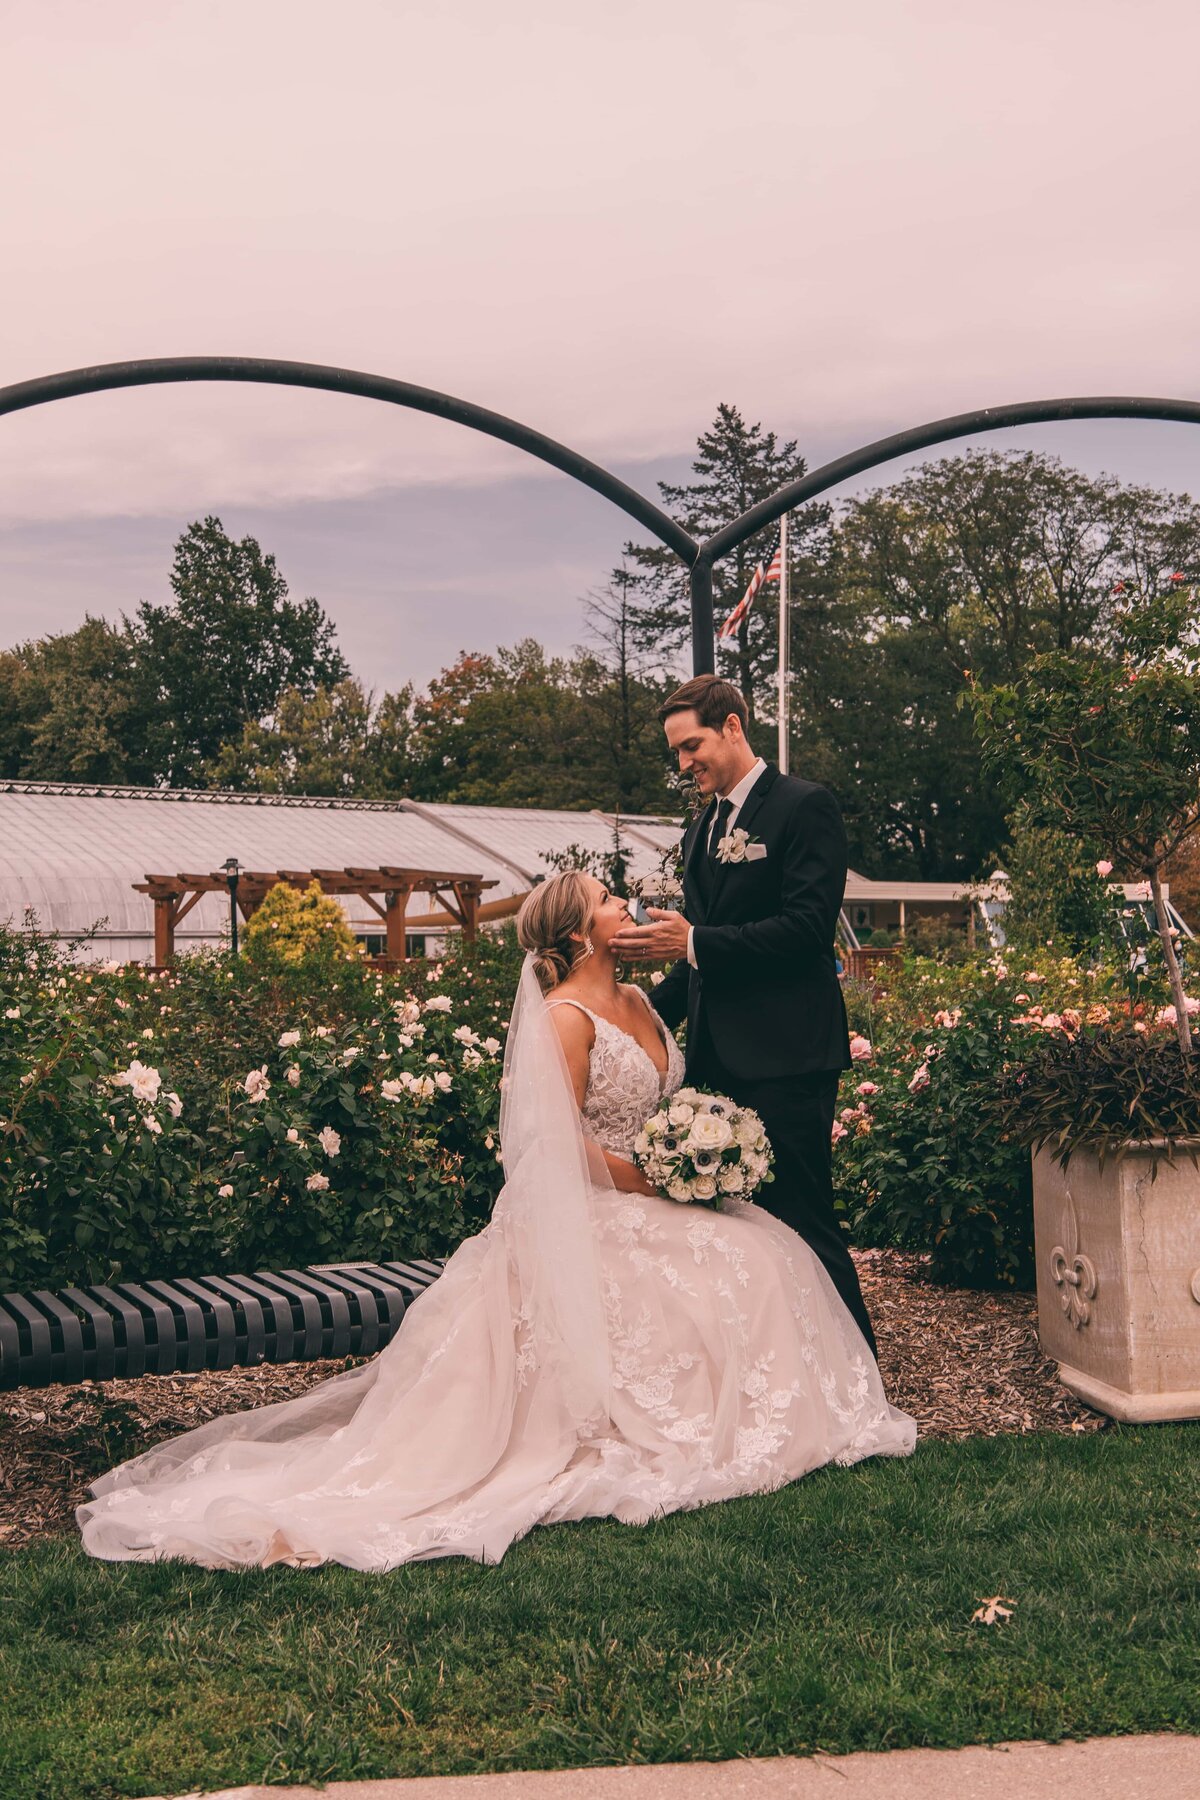 A bride and groom sharing a moment under an archway in a garden, with the bride seated and holding a bouquet, carefully planned by a wedding coordinator in Iowa.